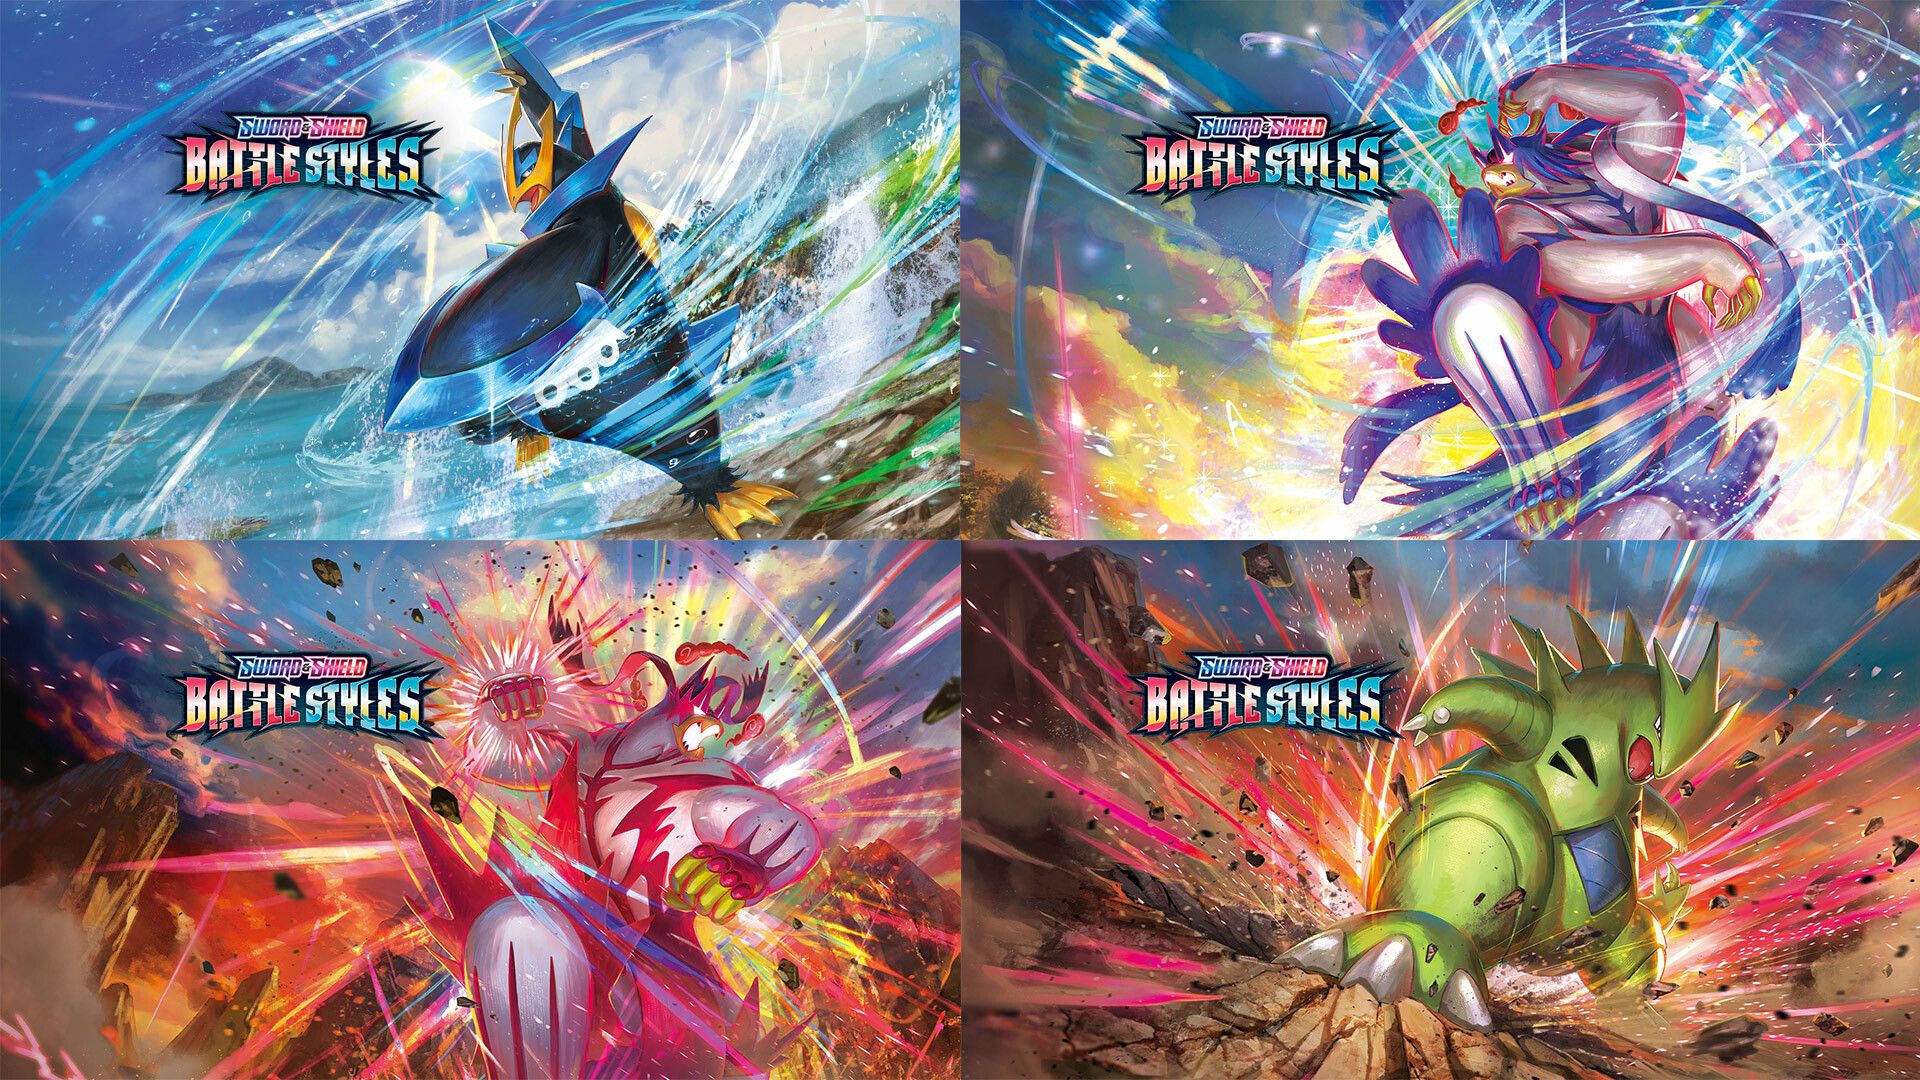 Download Battle Styles Wallpaper. PokeGuardian. We Bring You the Latest Pokémon TCG News Every Day!